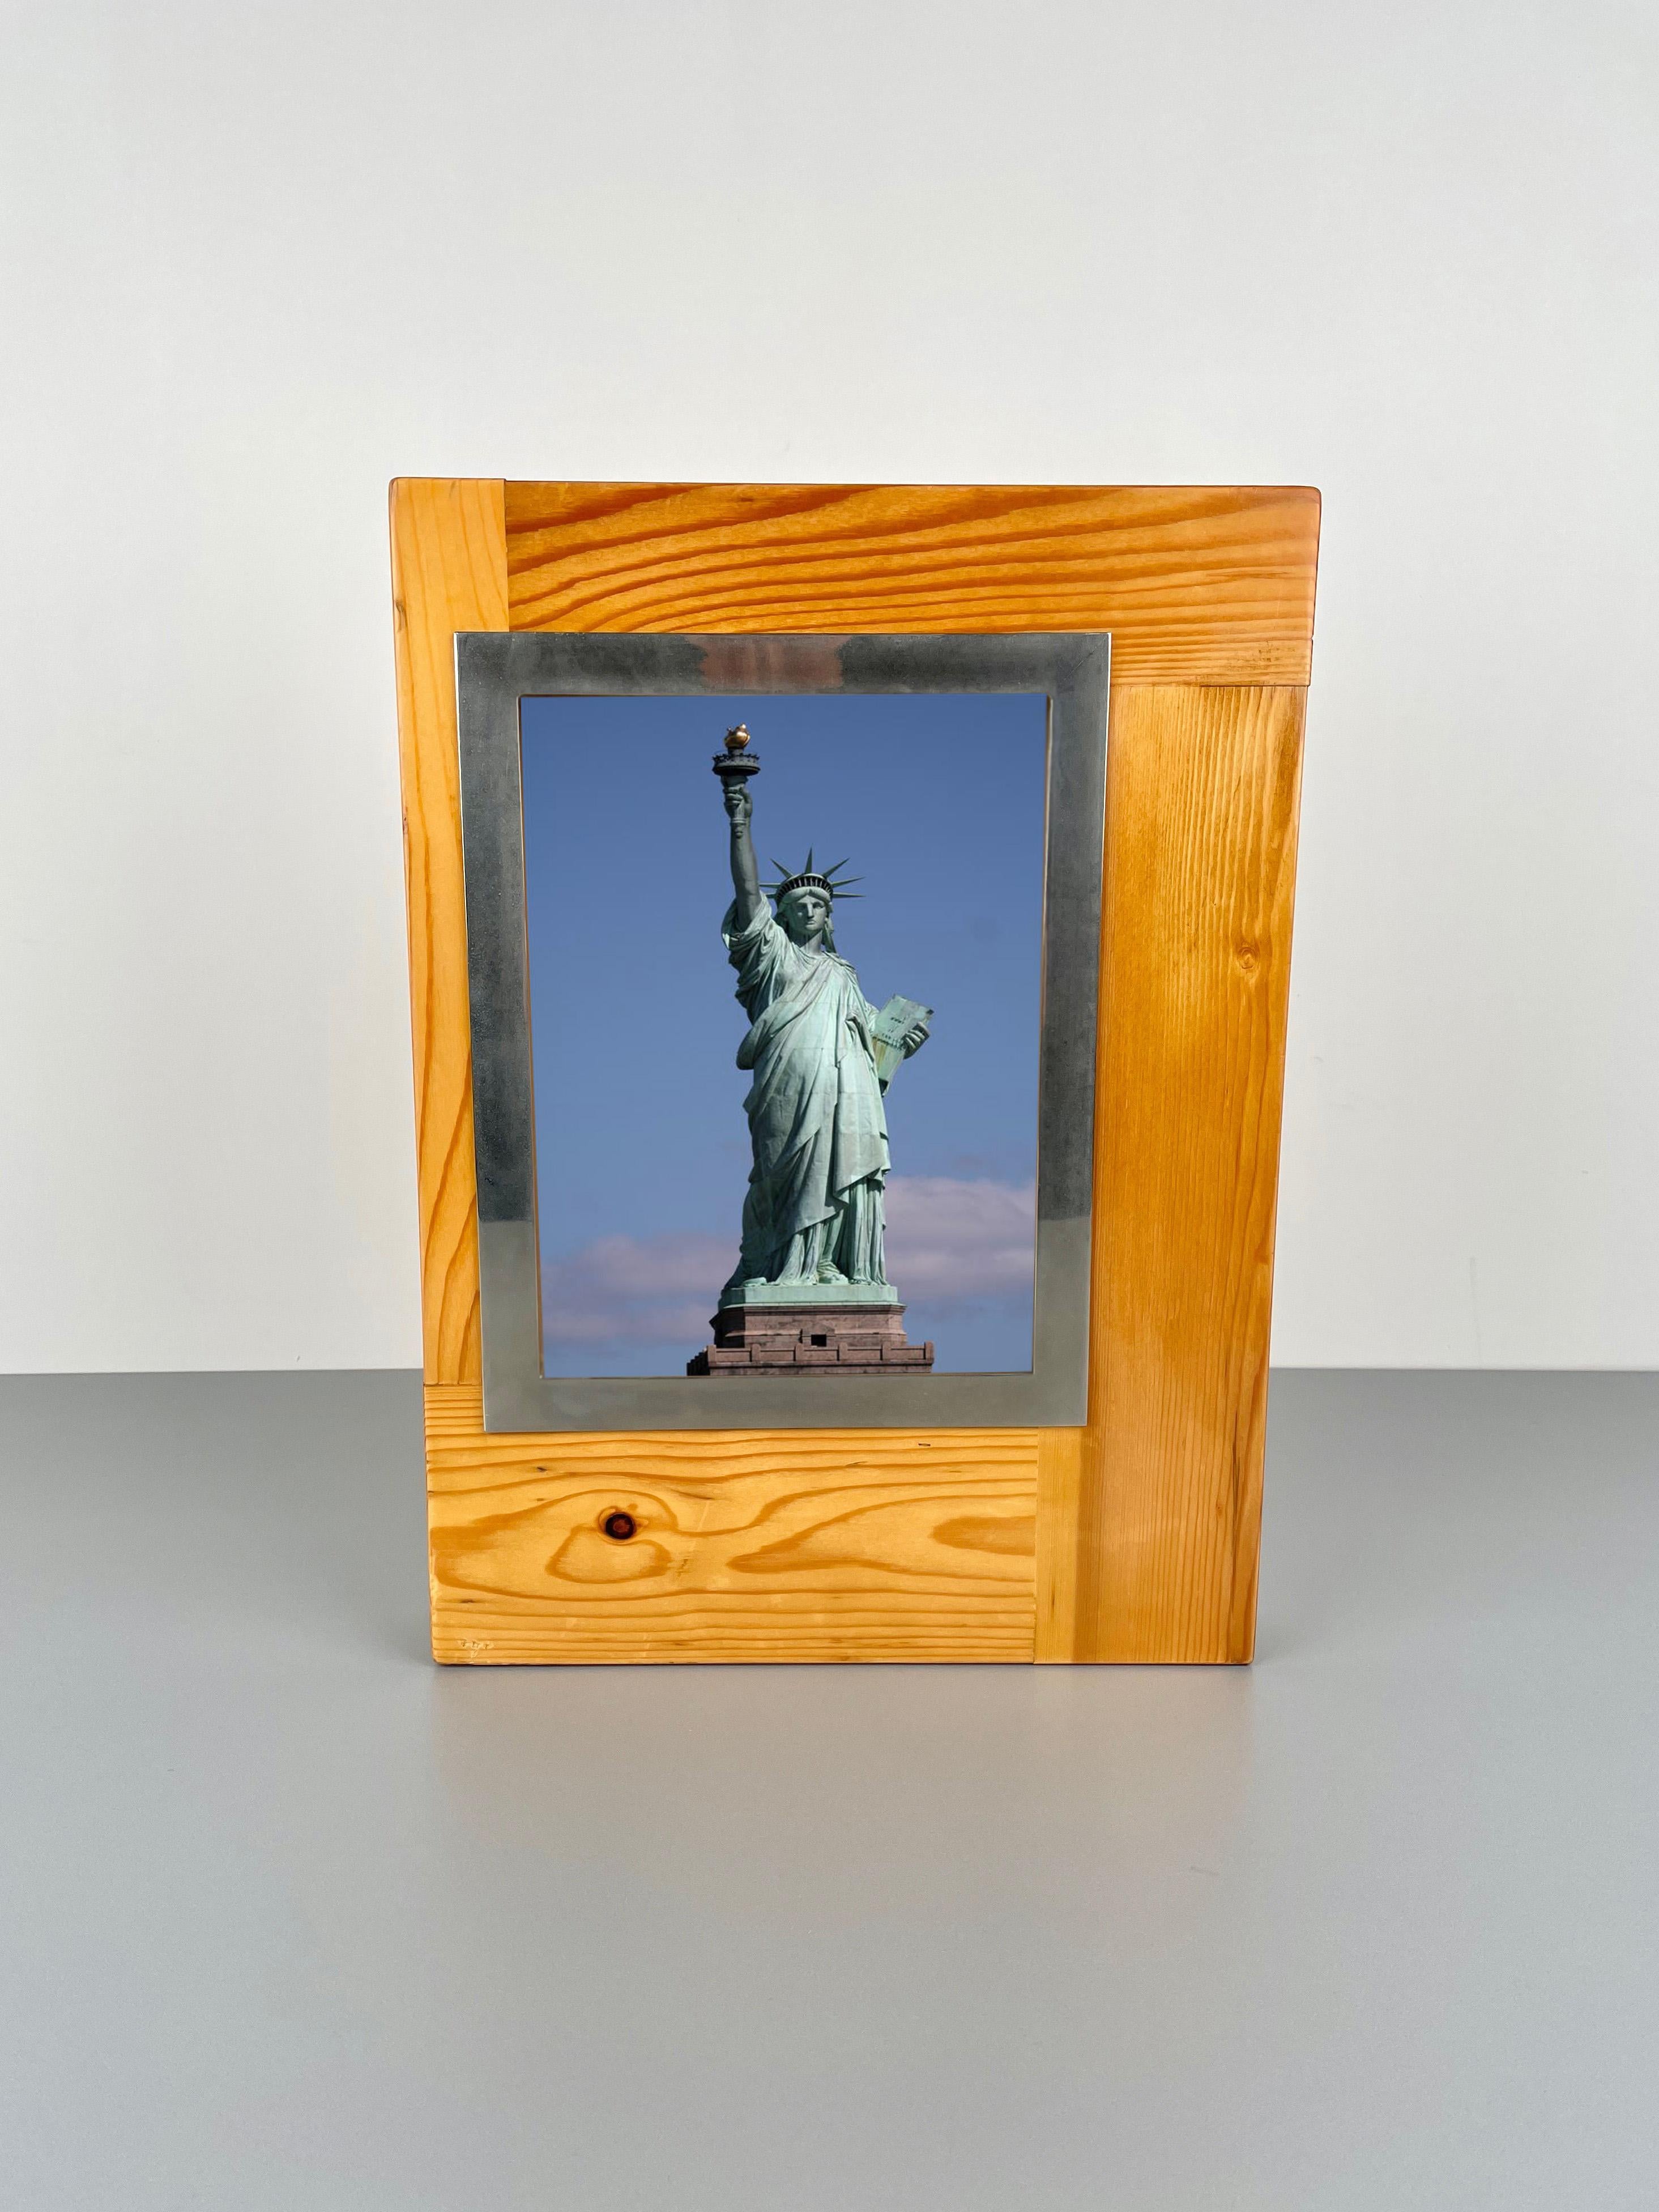 Big picture frame in pine wood with steel borders made by the Italian designer Felice Antonio Botta in the 1970s. 
The original label is still attached on the glass, as shown in the photos. 

The frame fits a picture with the following measures: